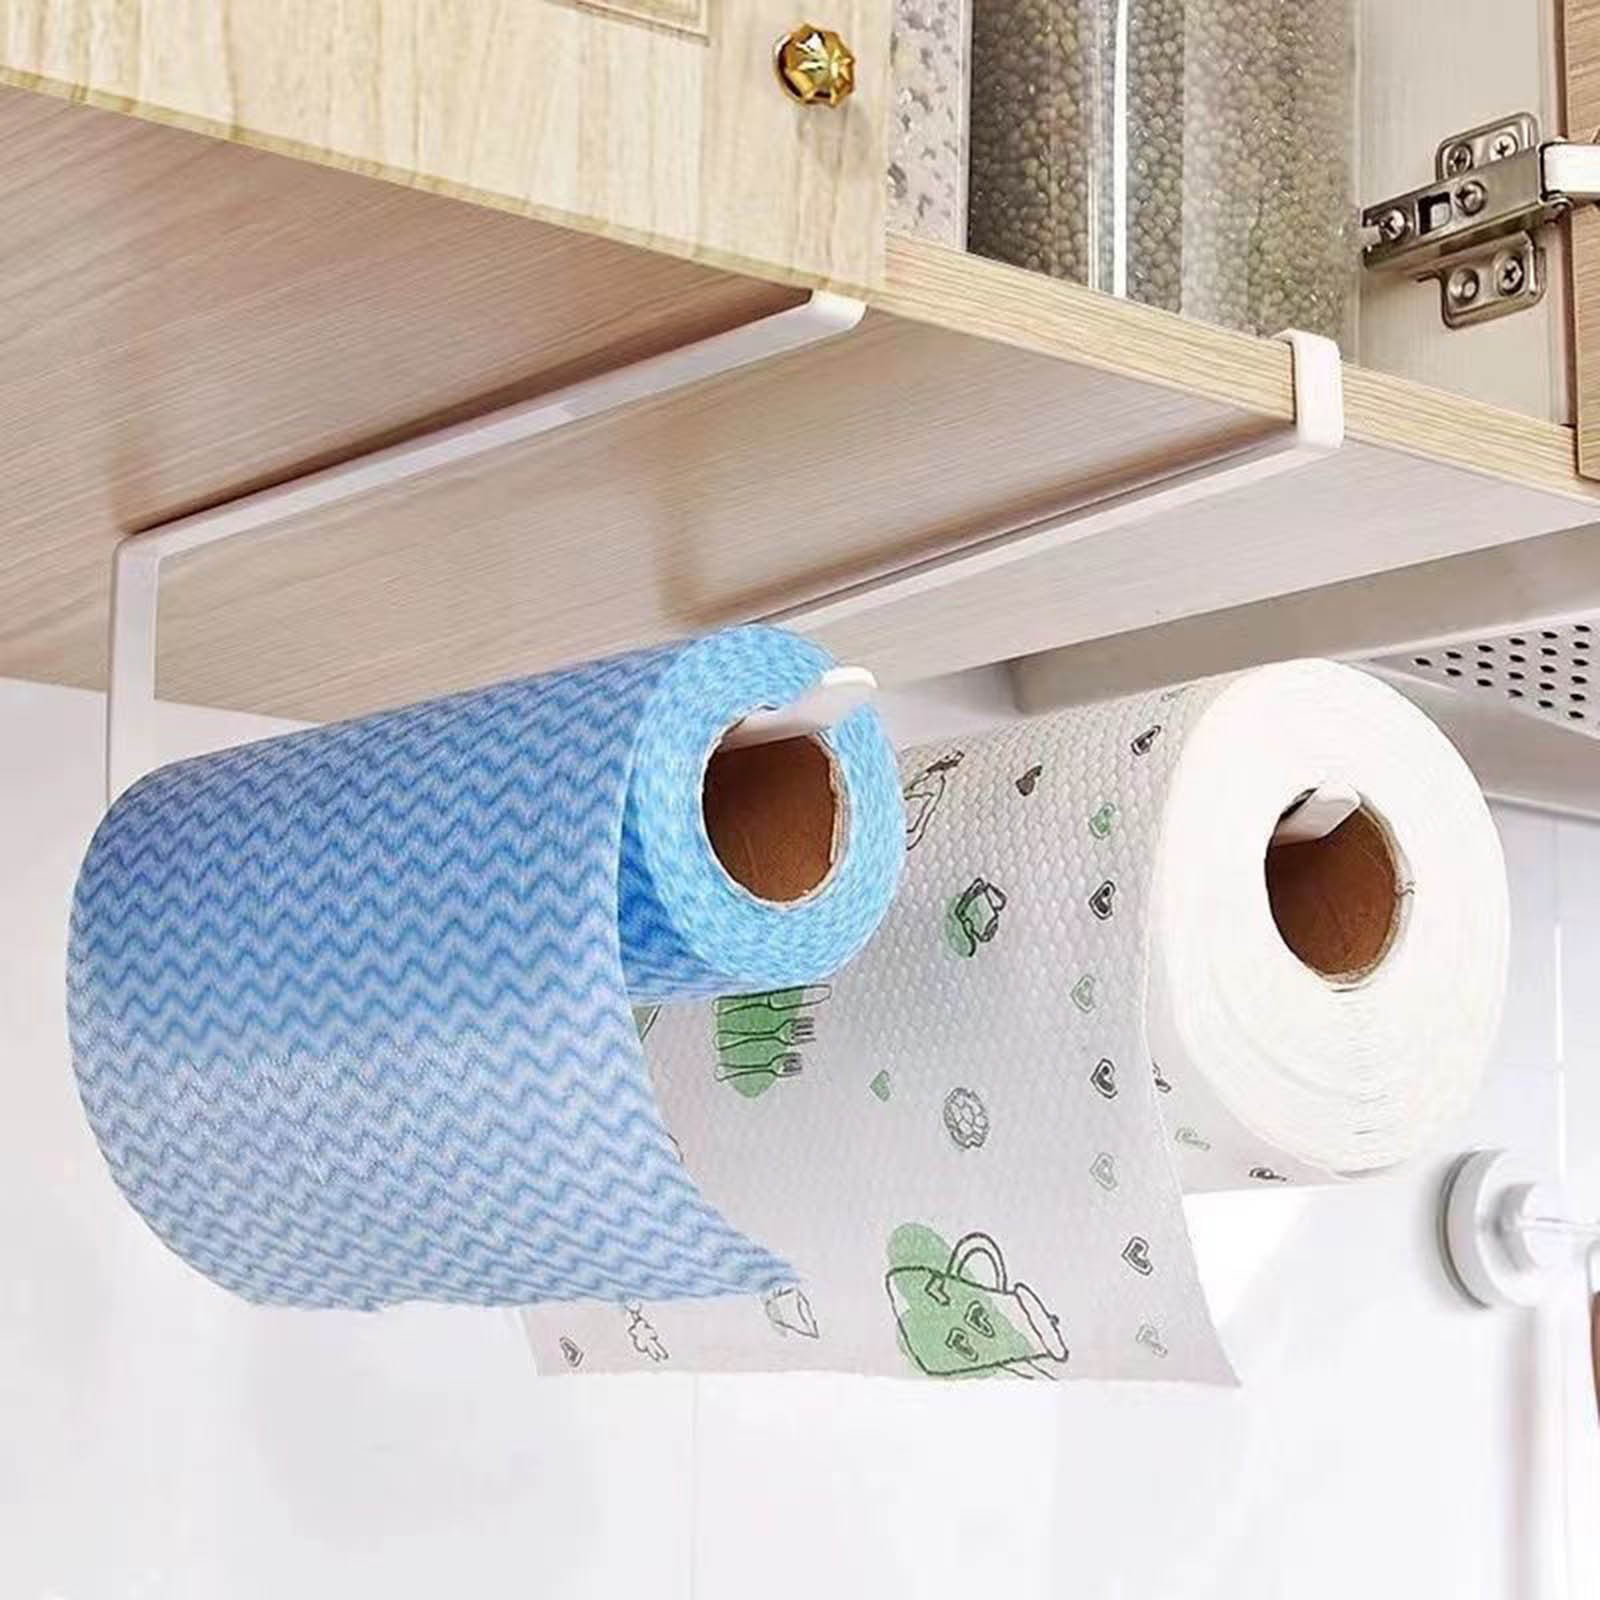 Lefree Paper Towel Holder: From Kitchen to Camping, Portability and Ve